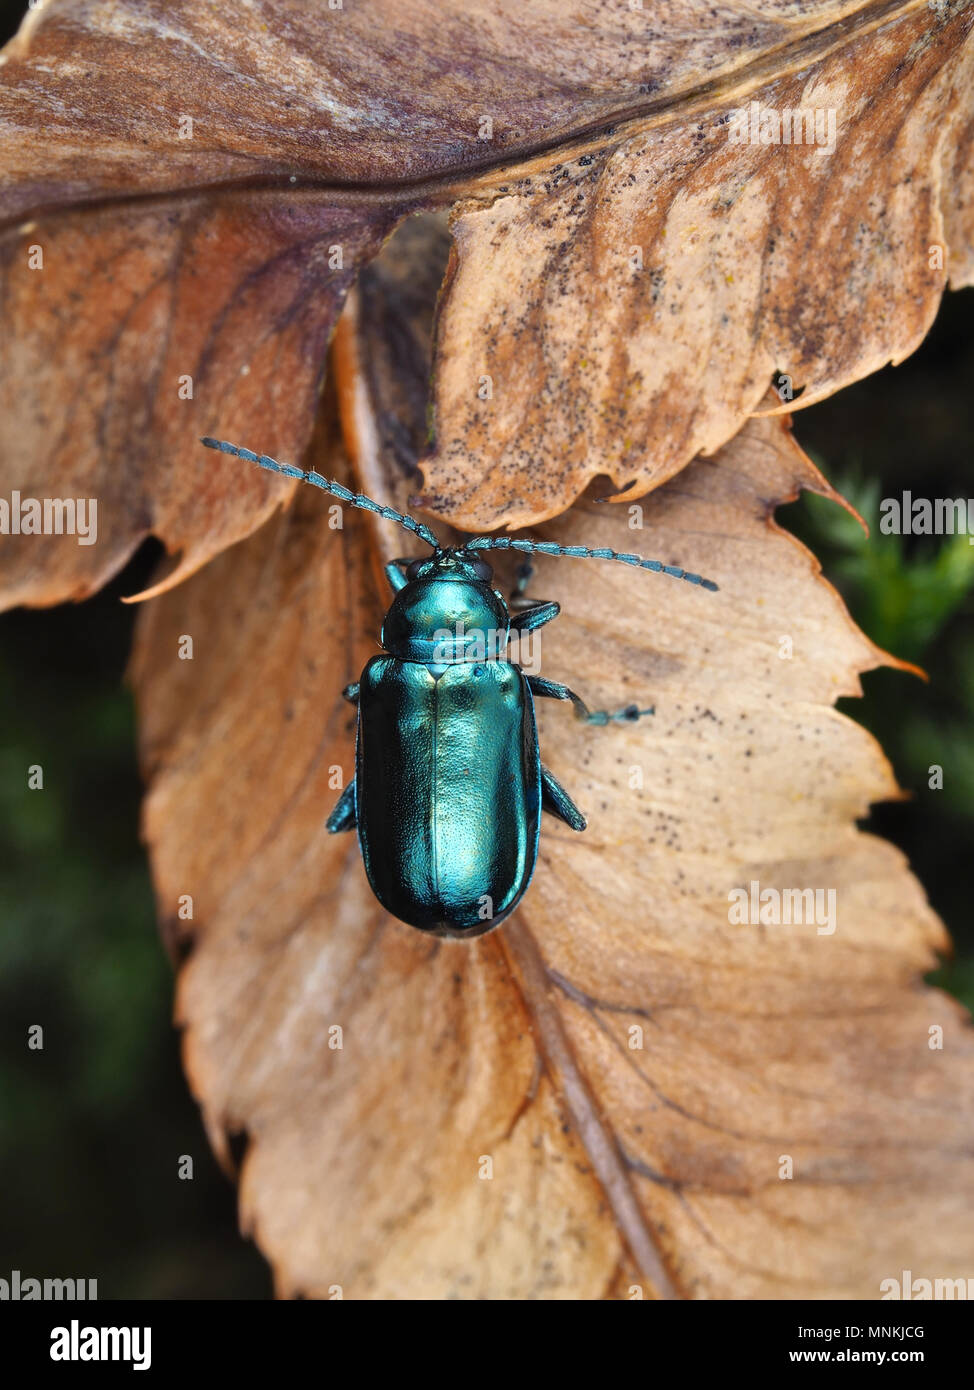 Altica sp. beetle on dried leaves, dorsal view Stock Photo